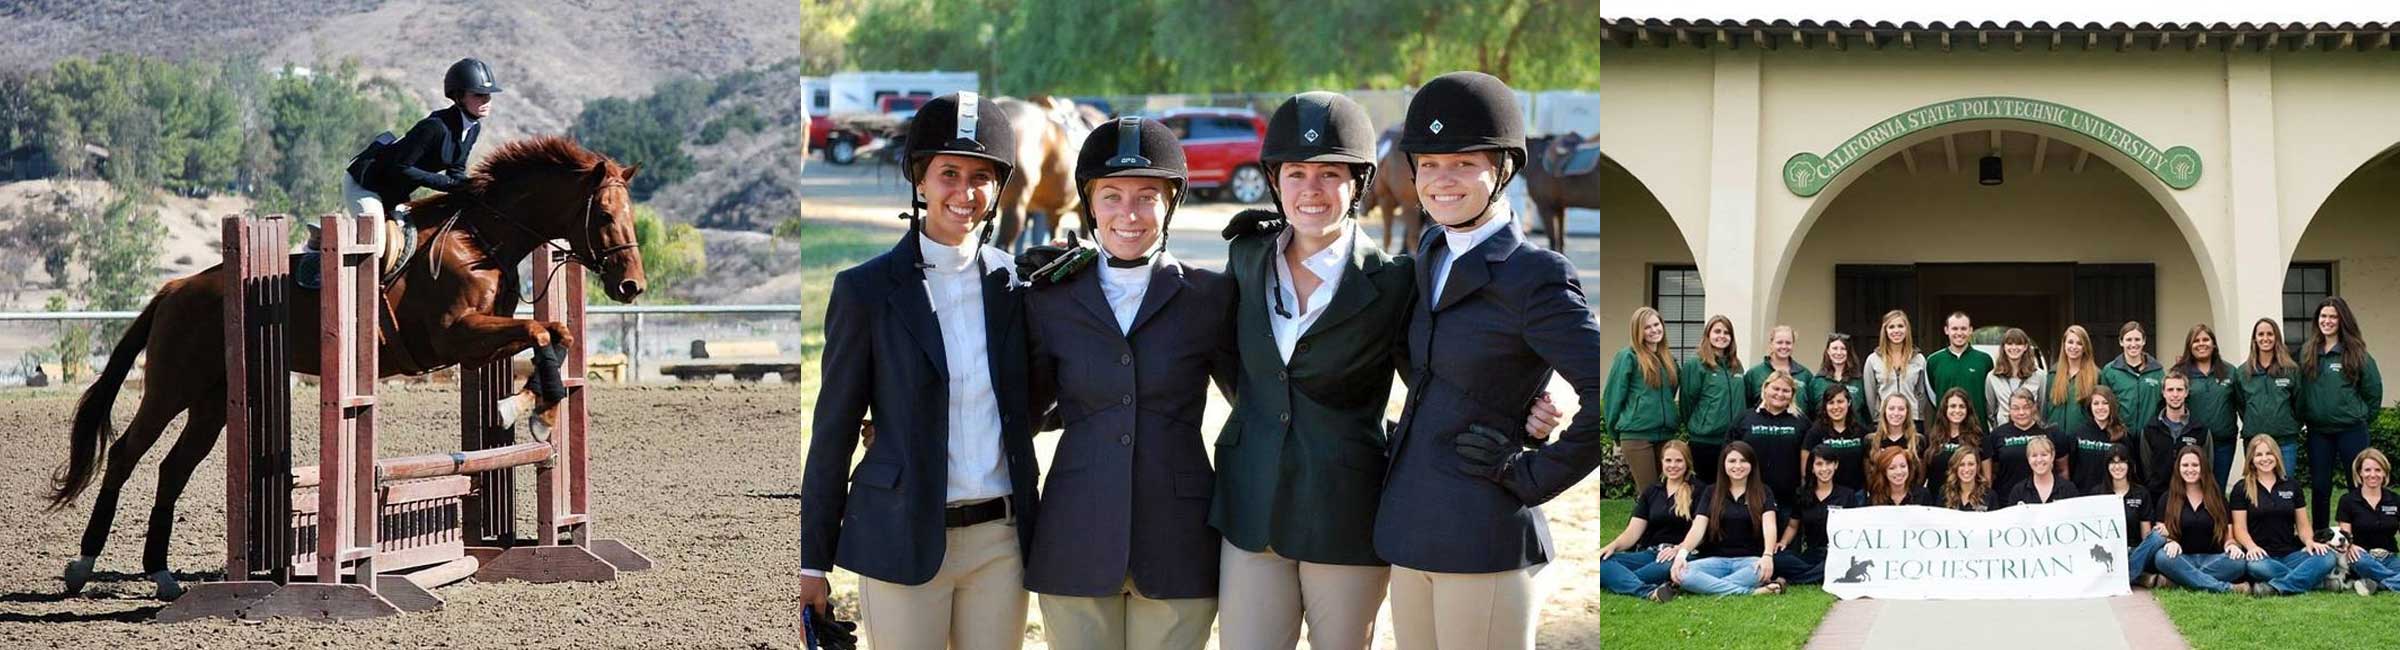 student equestrian clubs